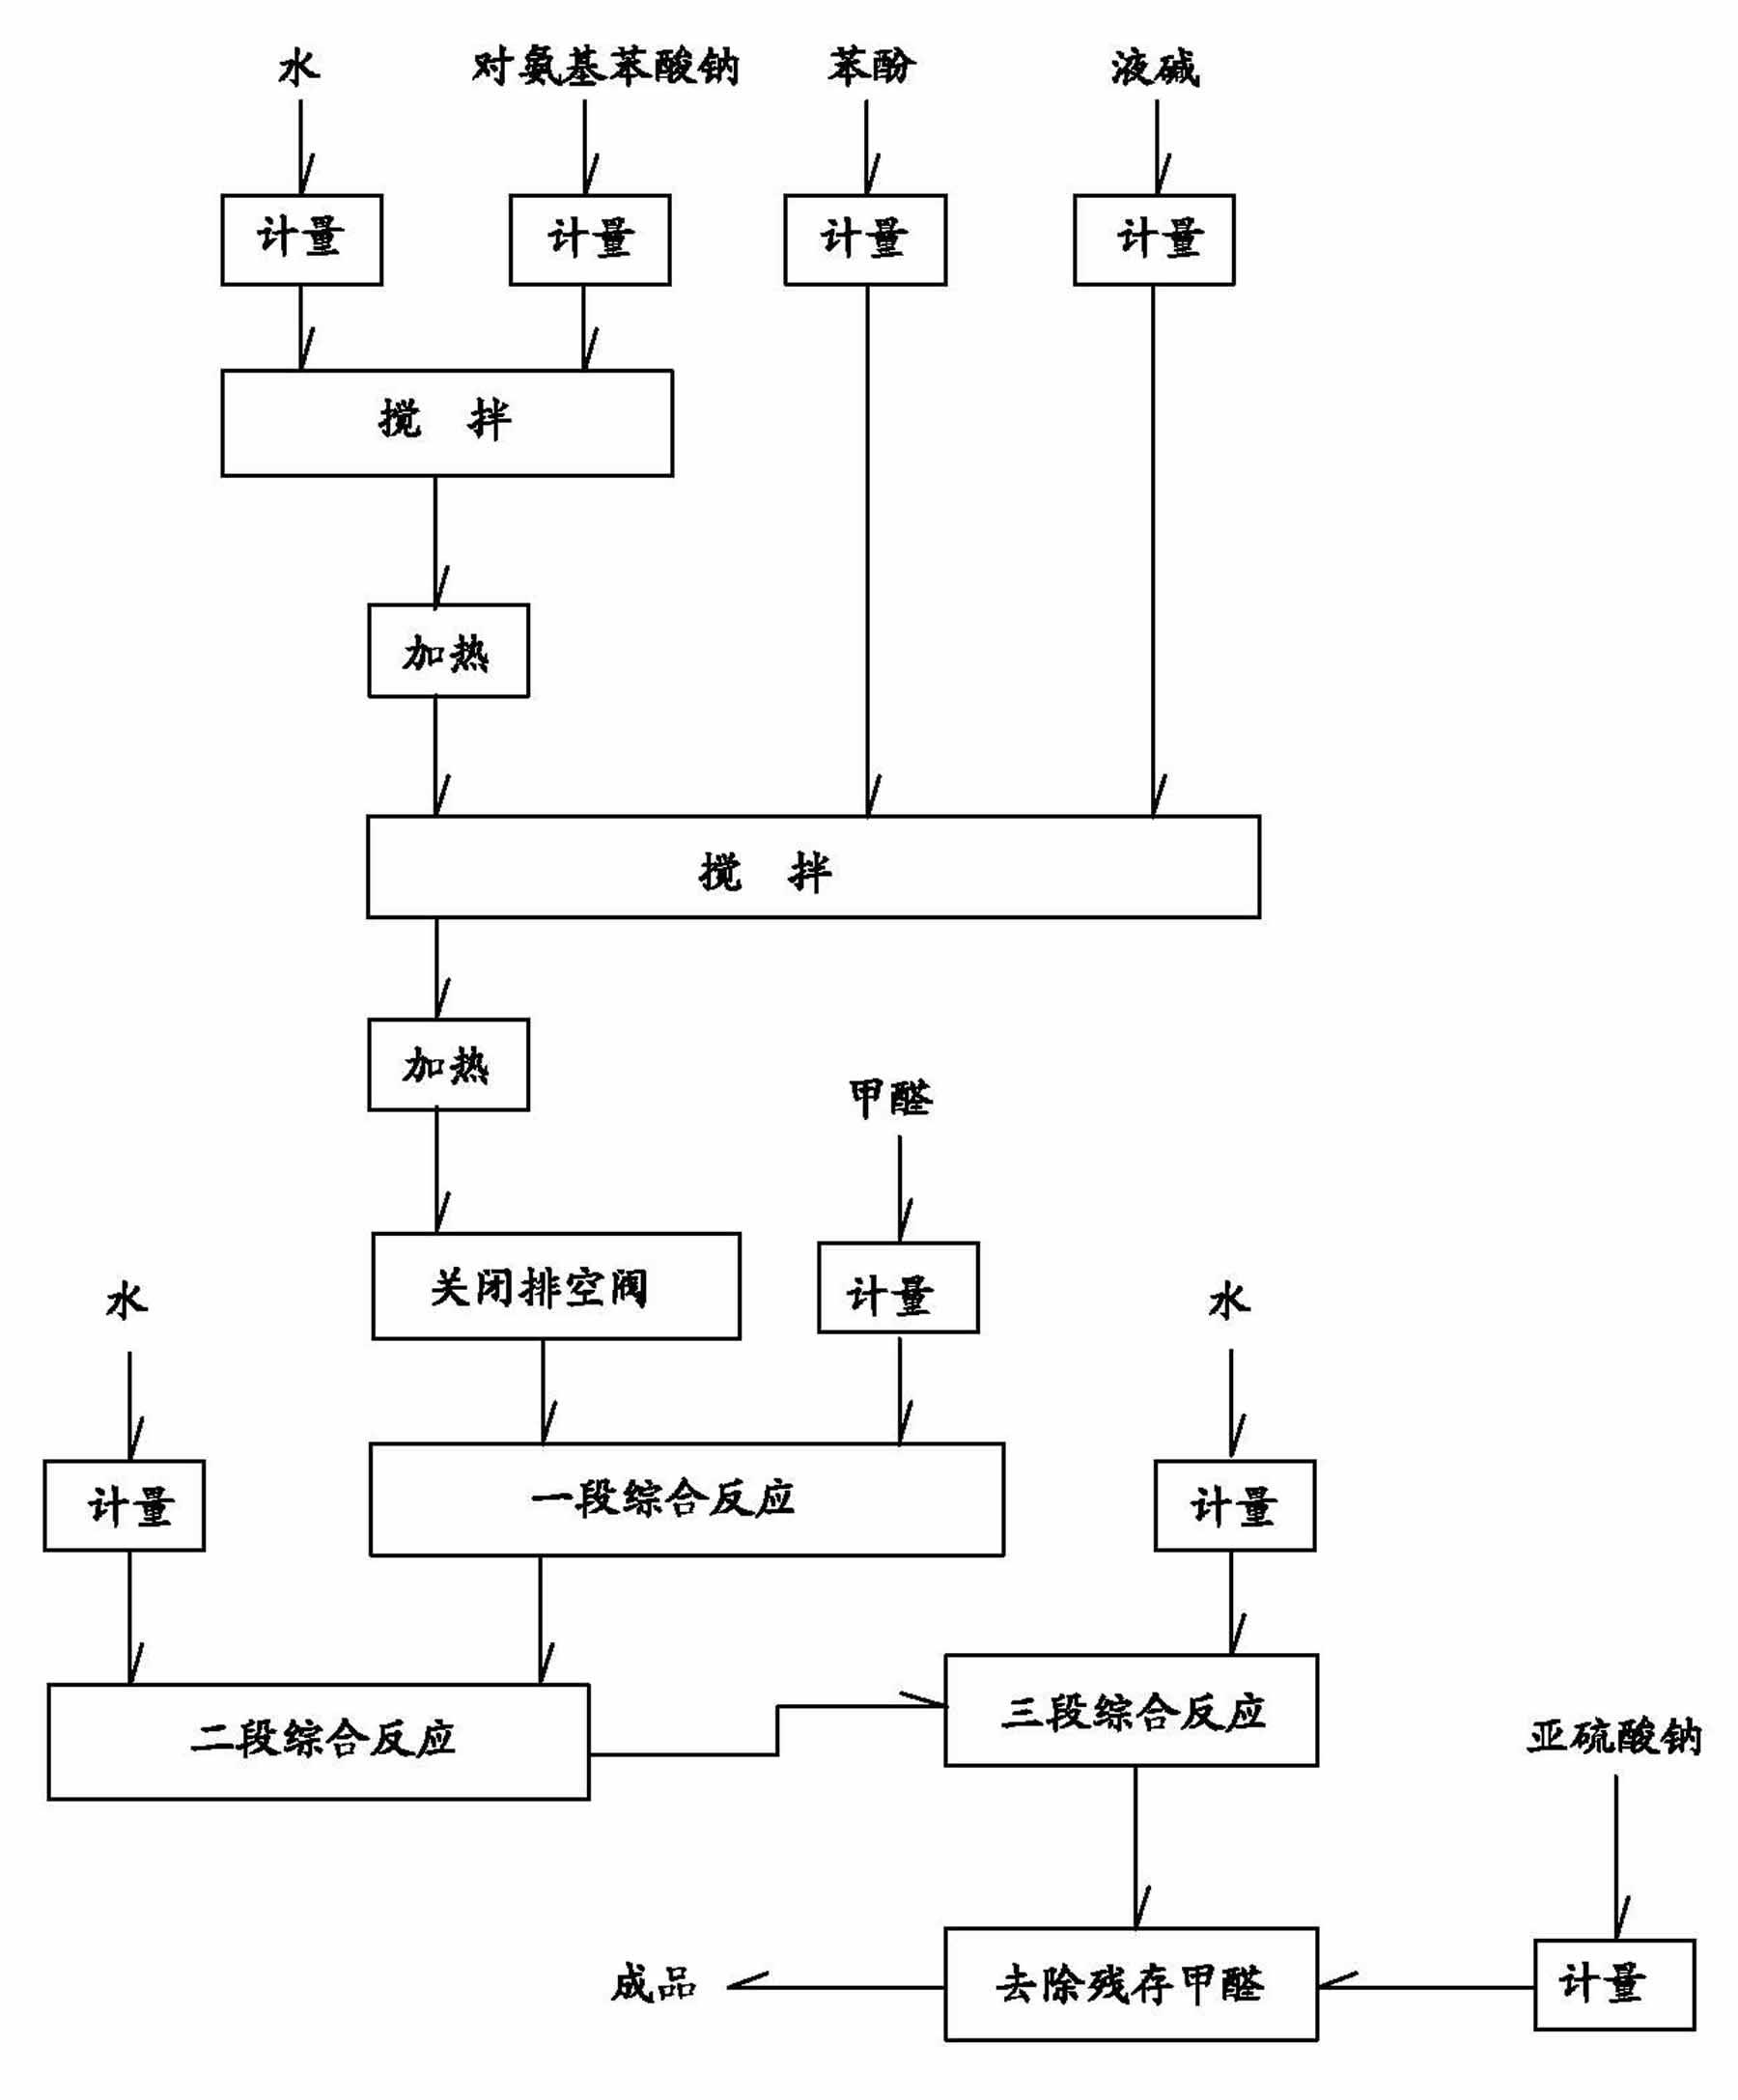 Method for producing sulfamate-series water reducing agent and equipment for producing sulfamate-series water reducing agent